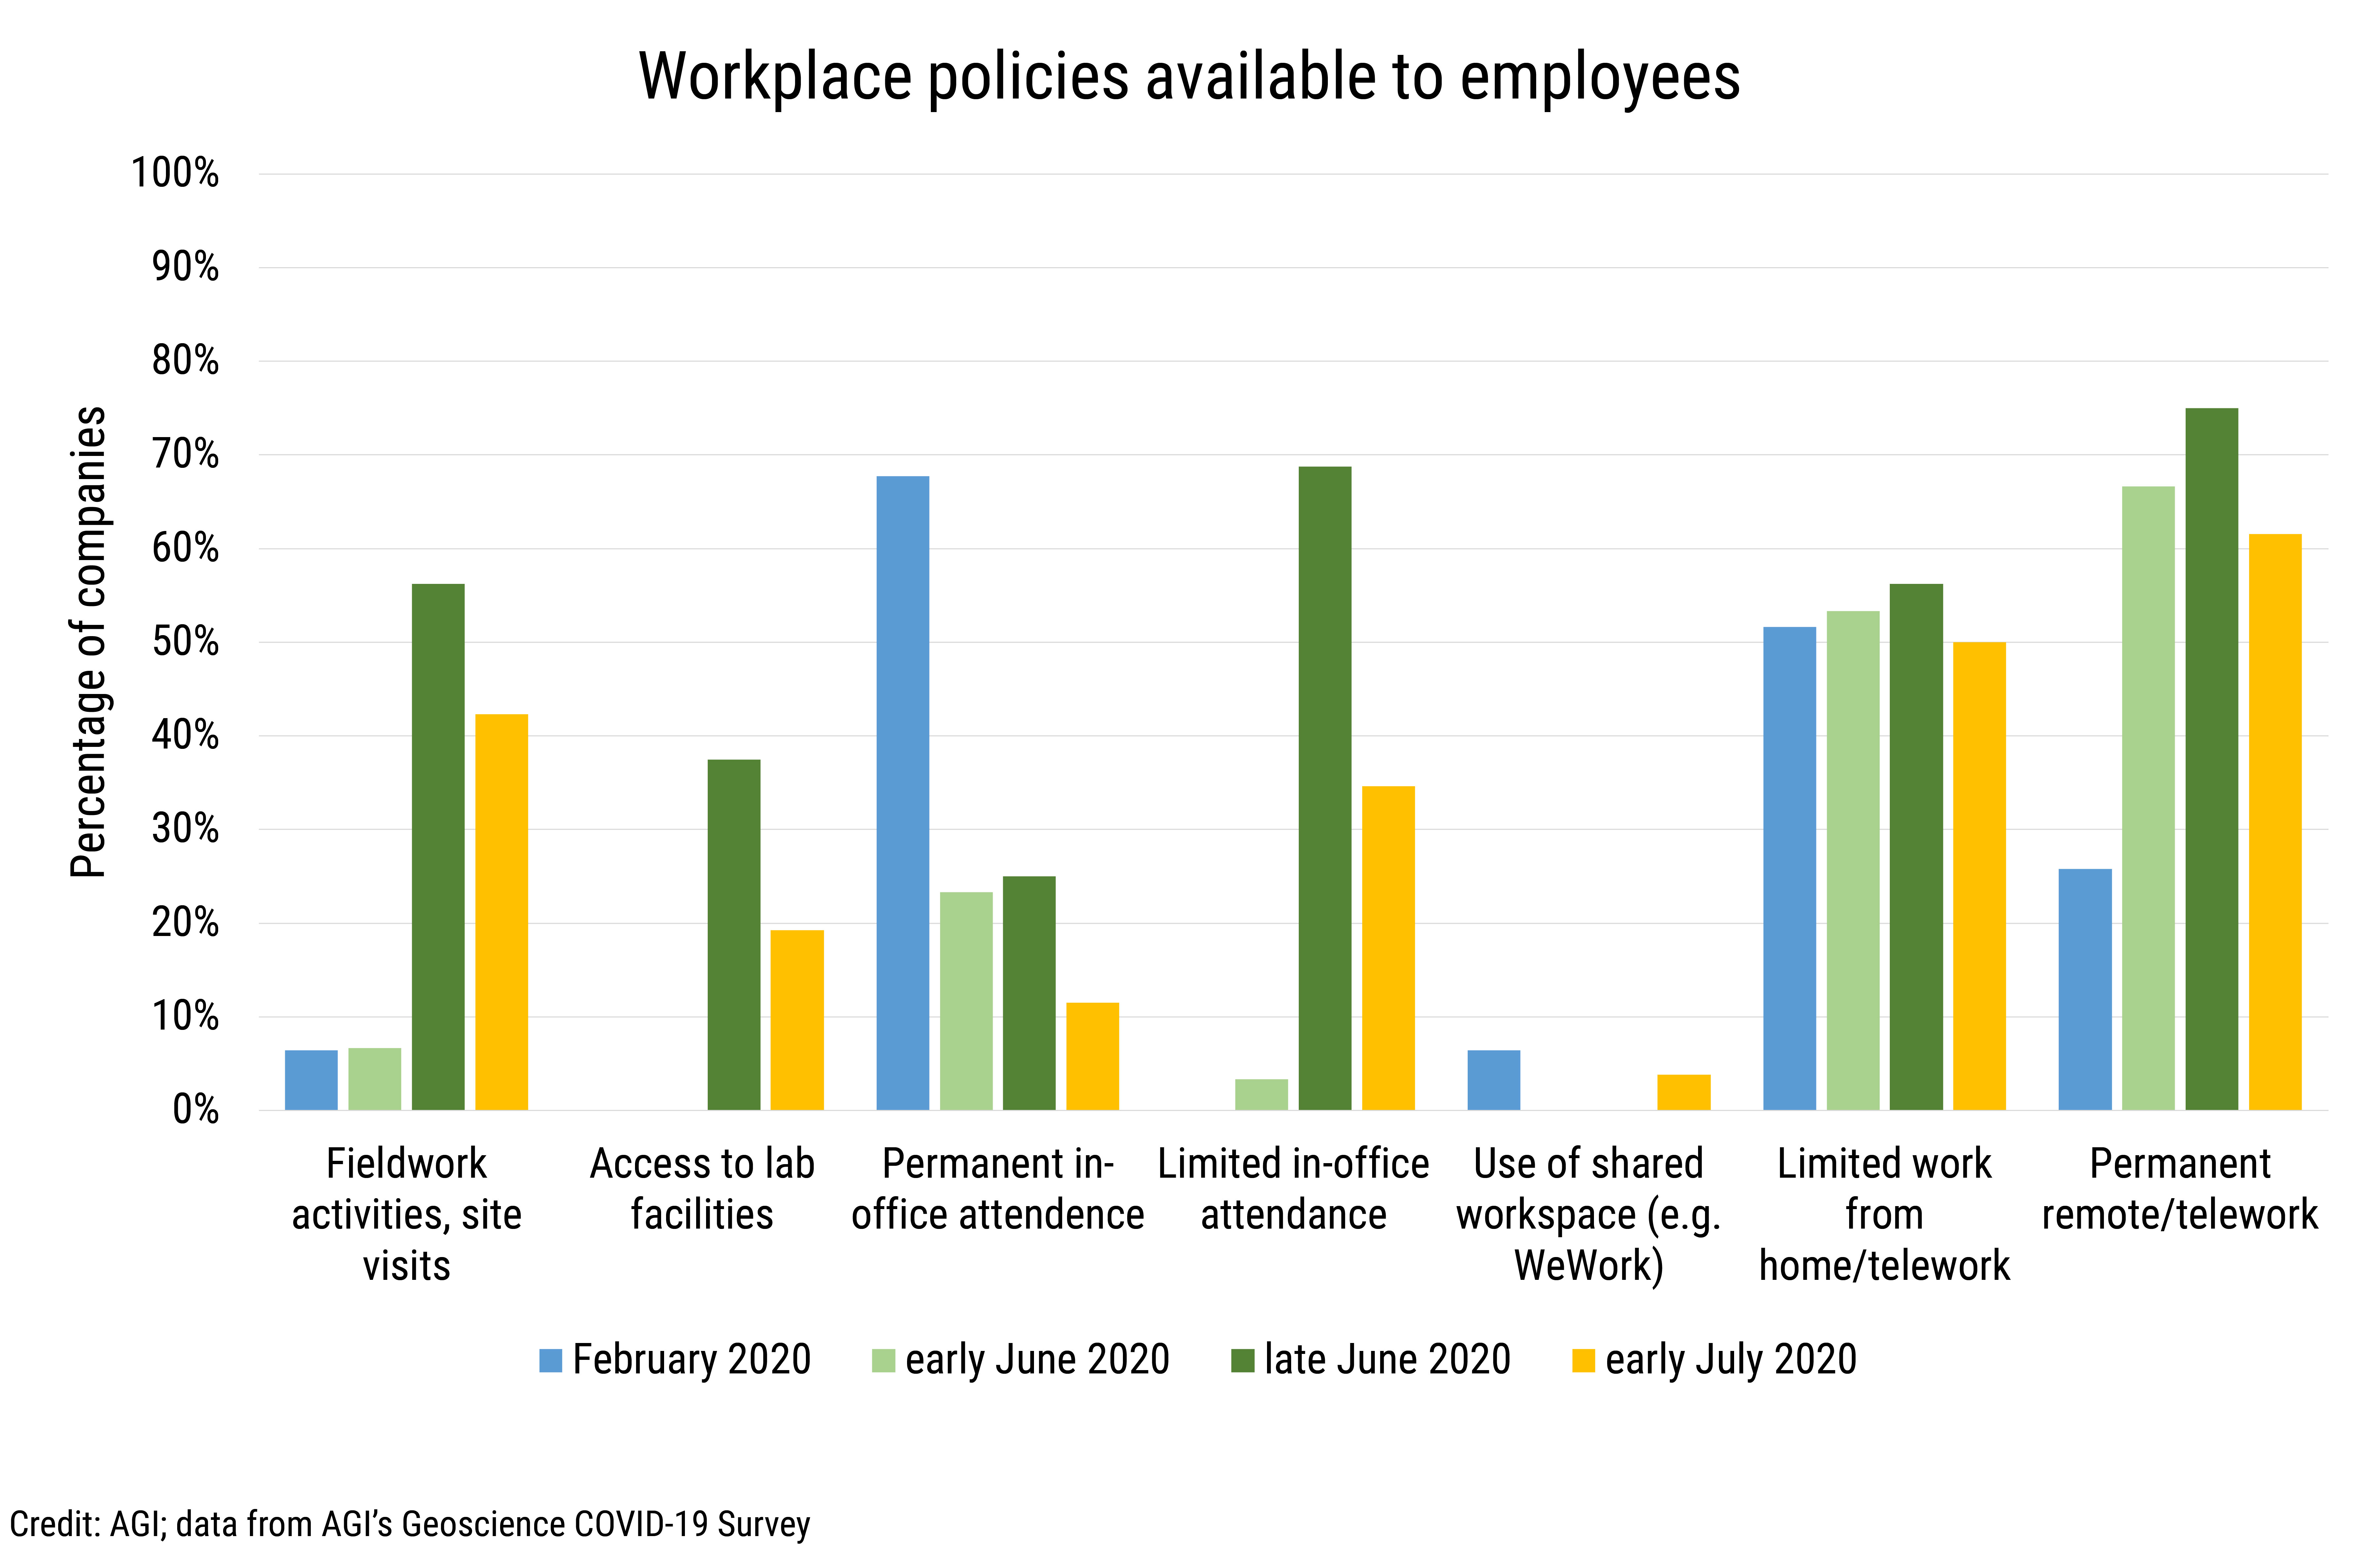 Data Brief 2020-012 chart-04: Workplace policies available to employees (Credit: AGI; data from AGI's Geoscience COVID-19 Survey)